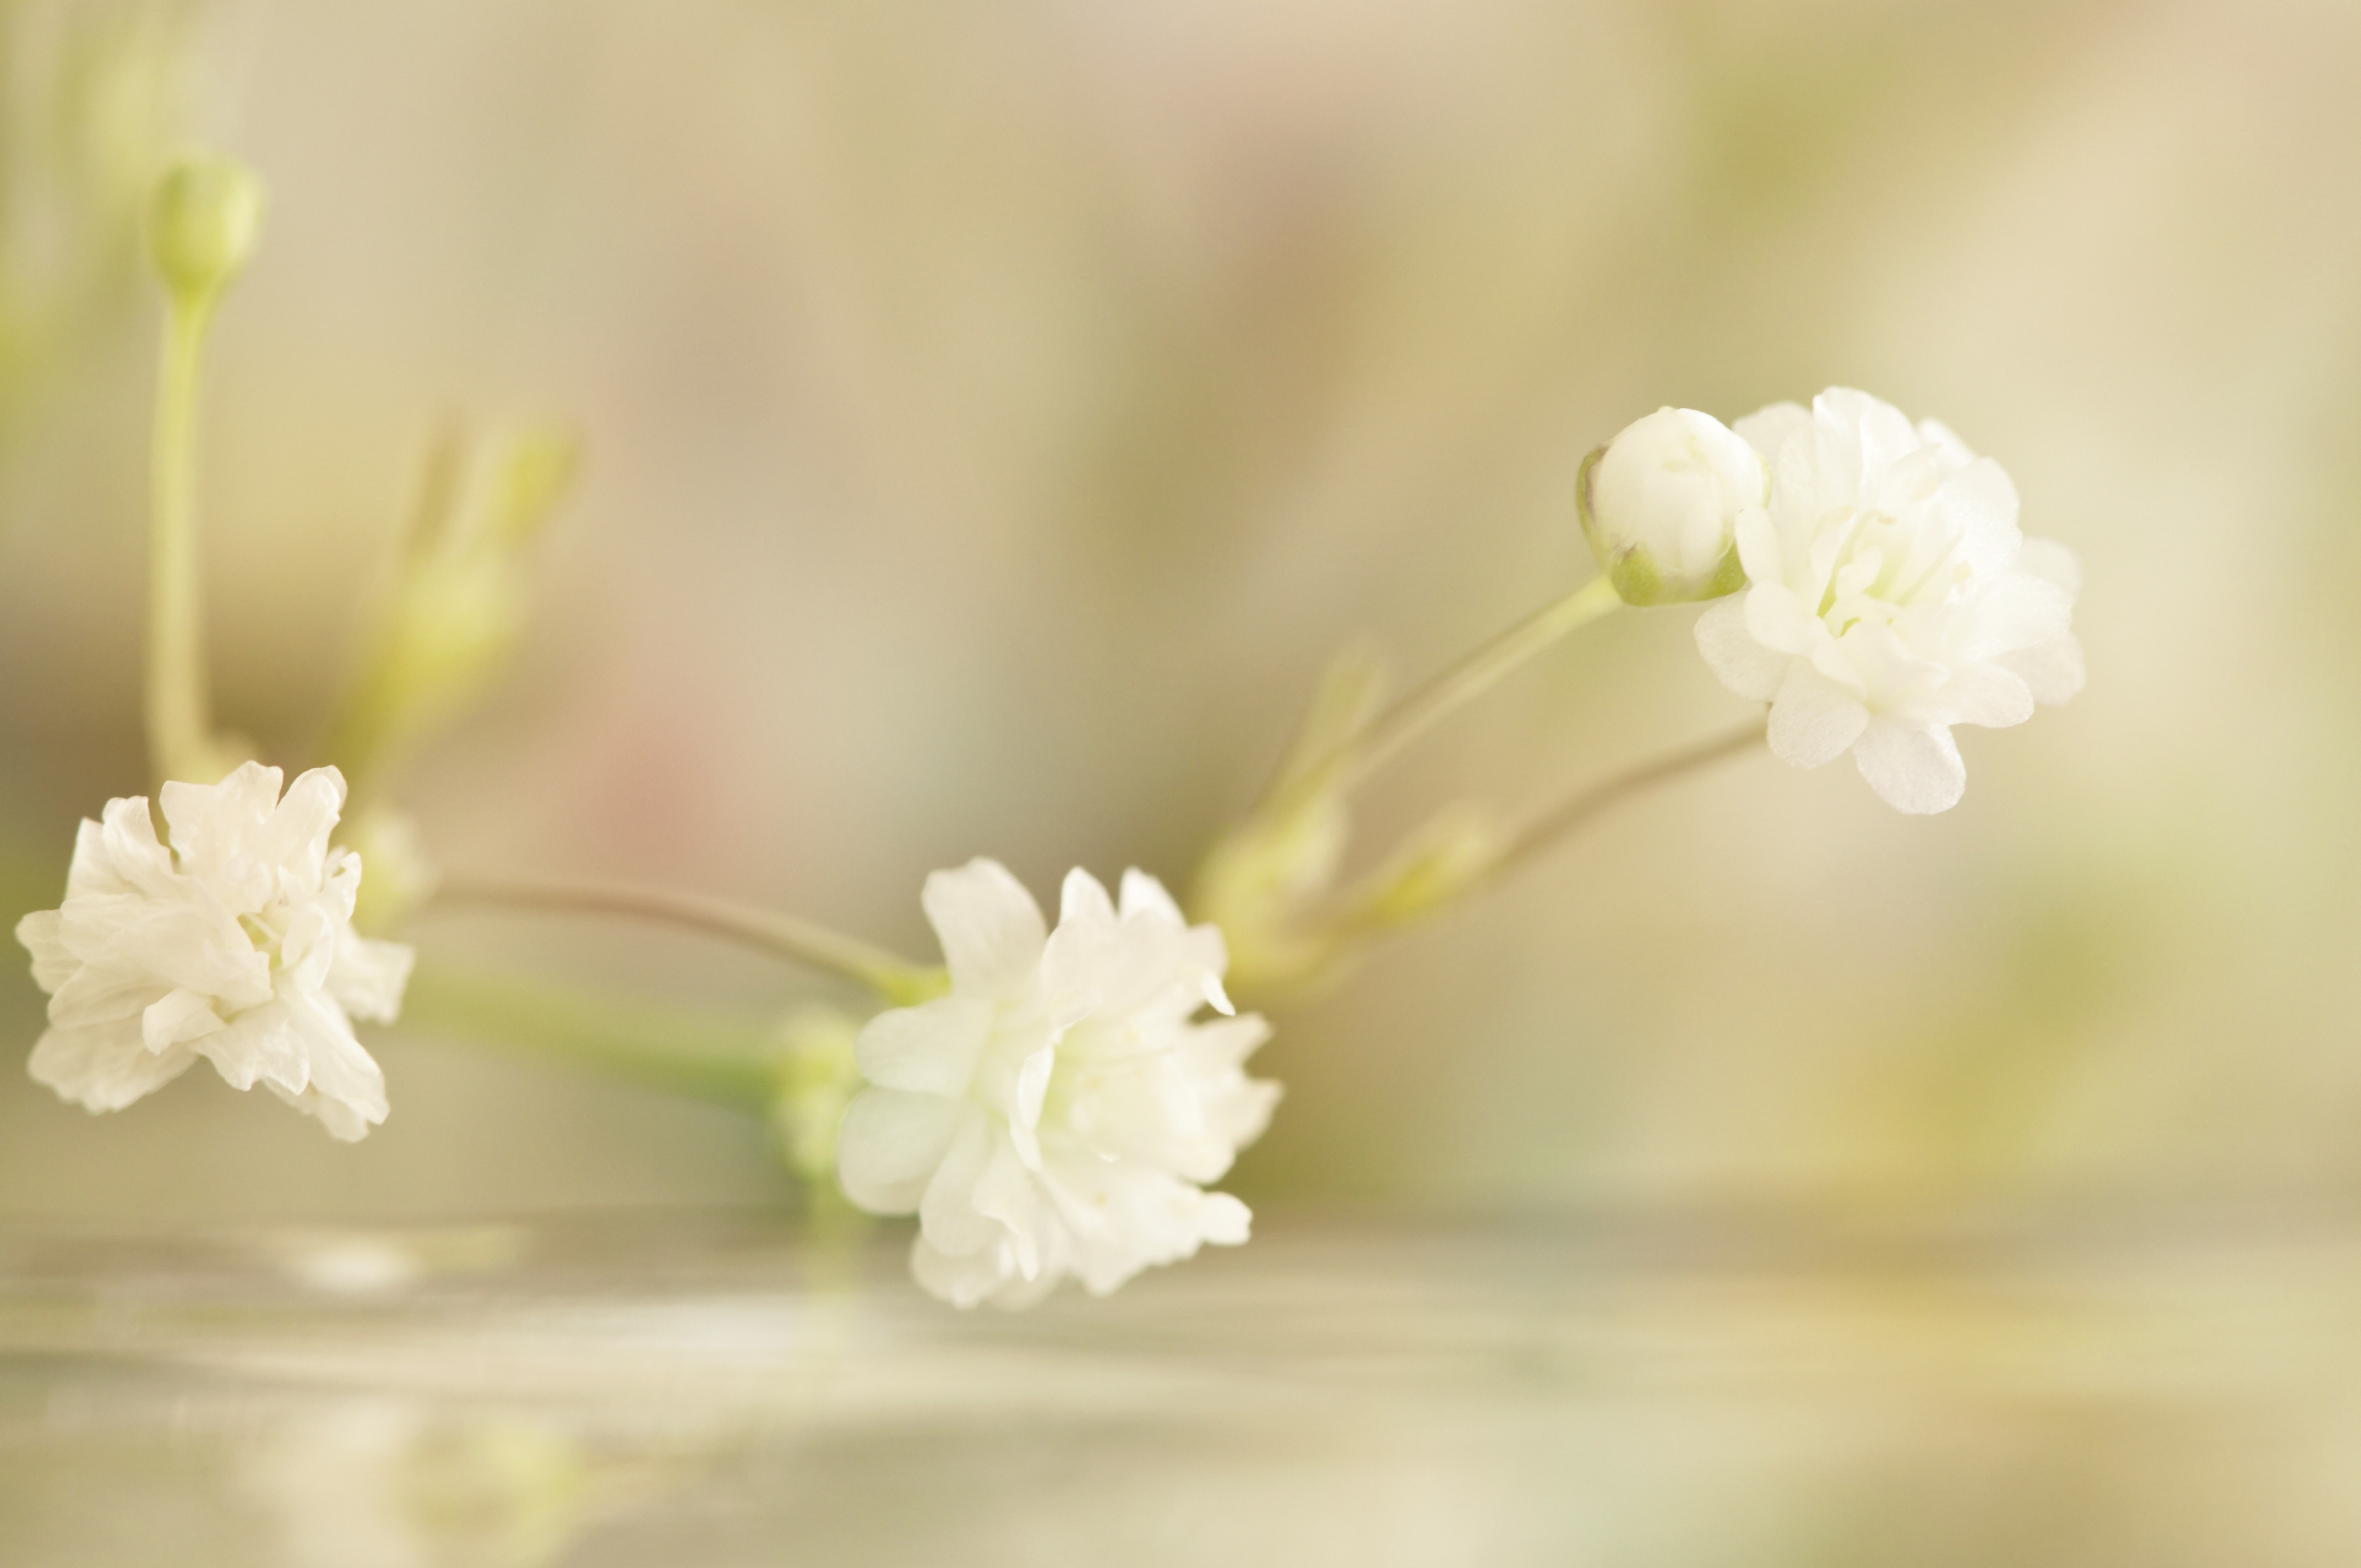 Download wallpaper 4288x2848 flowers, white, close-up, blurred hd ...